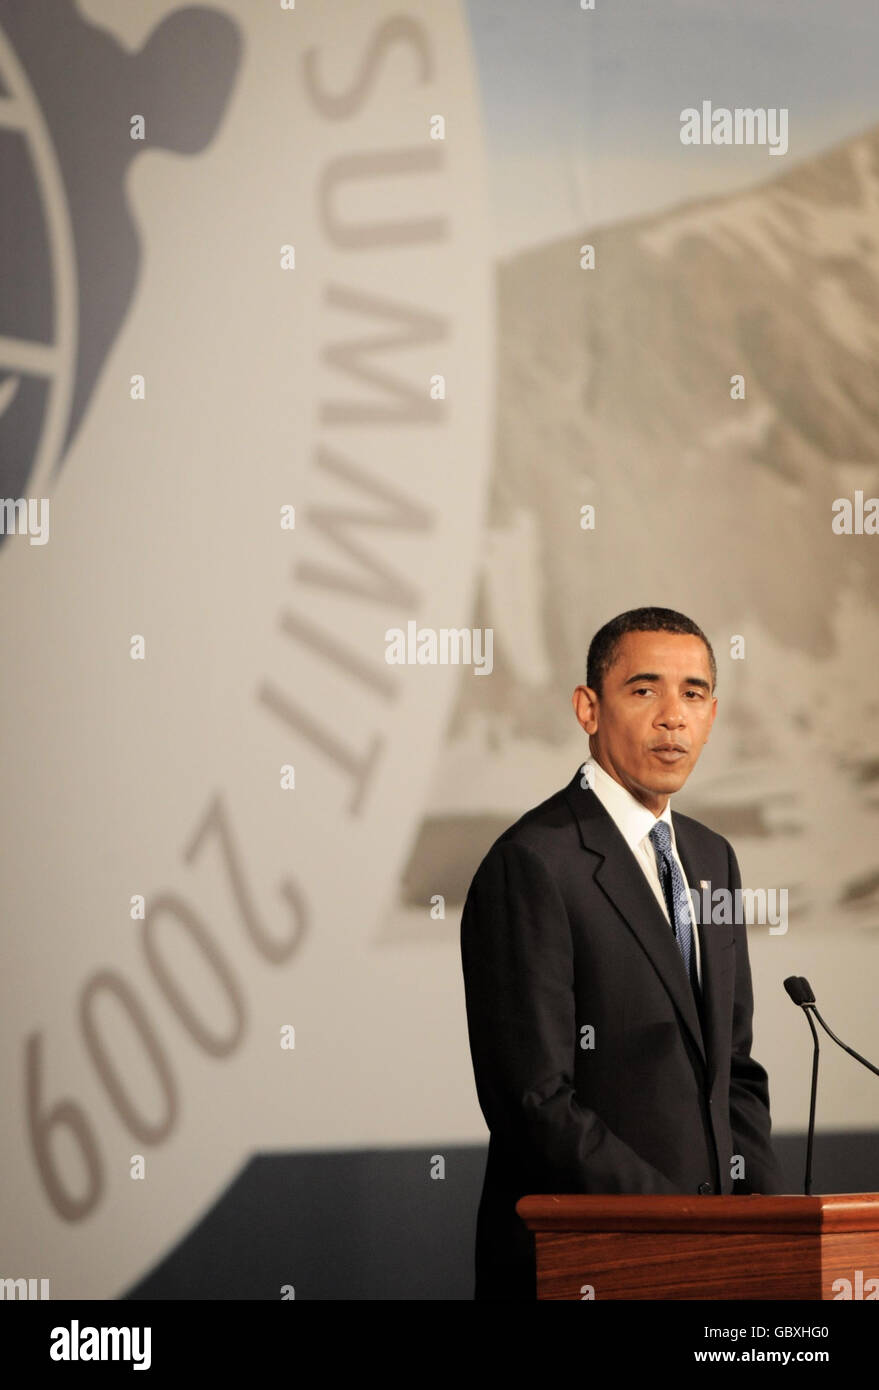 President Barack Obama addresses delegates about Carbon Capture after the Major Economic Forum meeting at the G8 Summit in L'Aquilla. Stock Photo